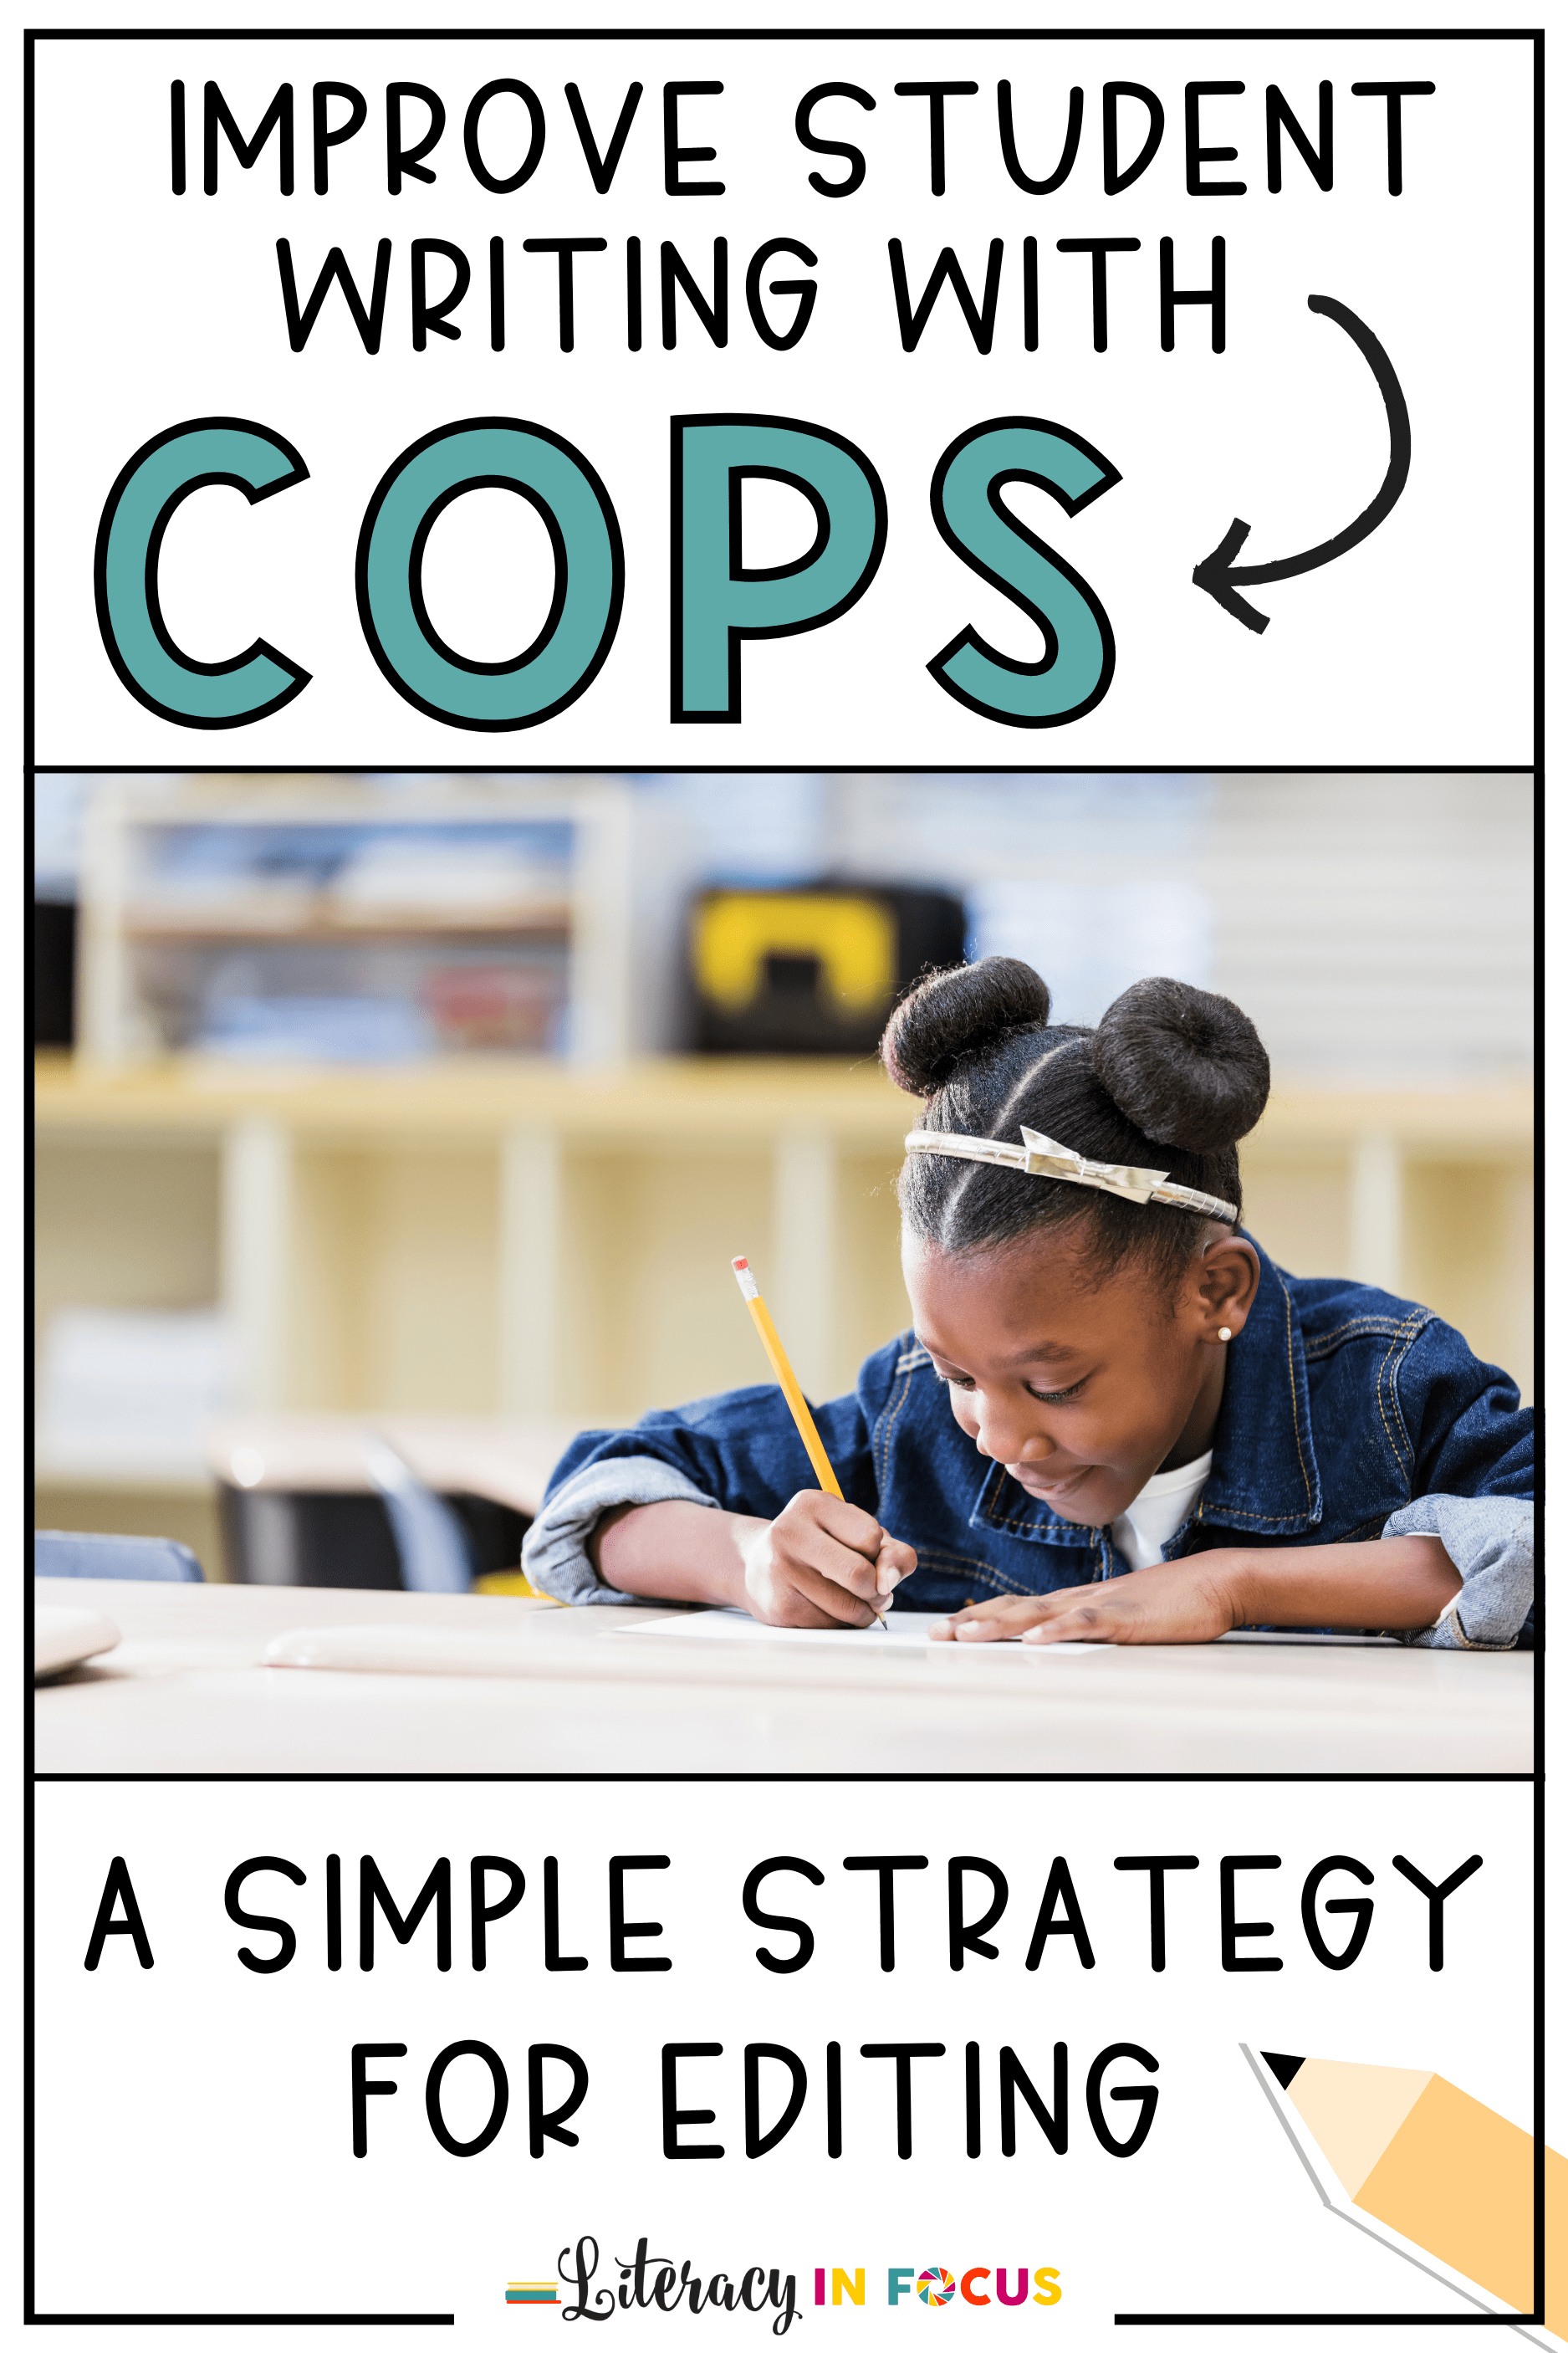 Improve Student Writing with COPS: A Simple Strategy for Editing